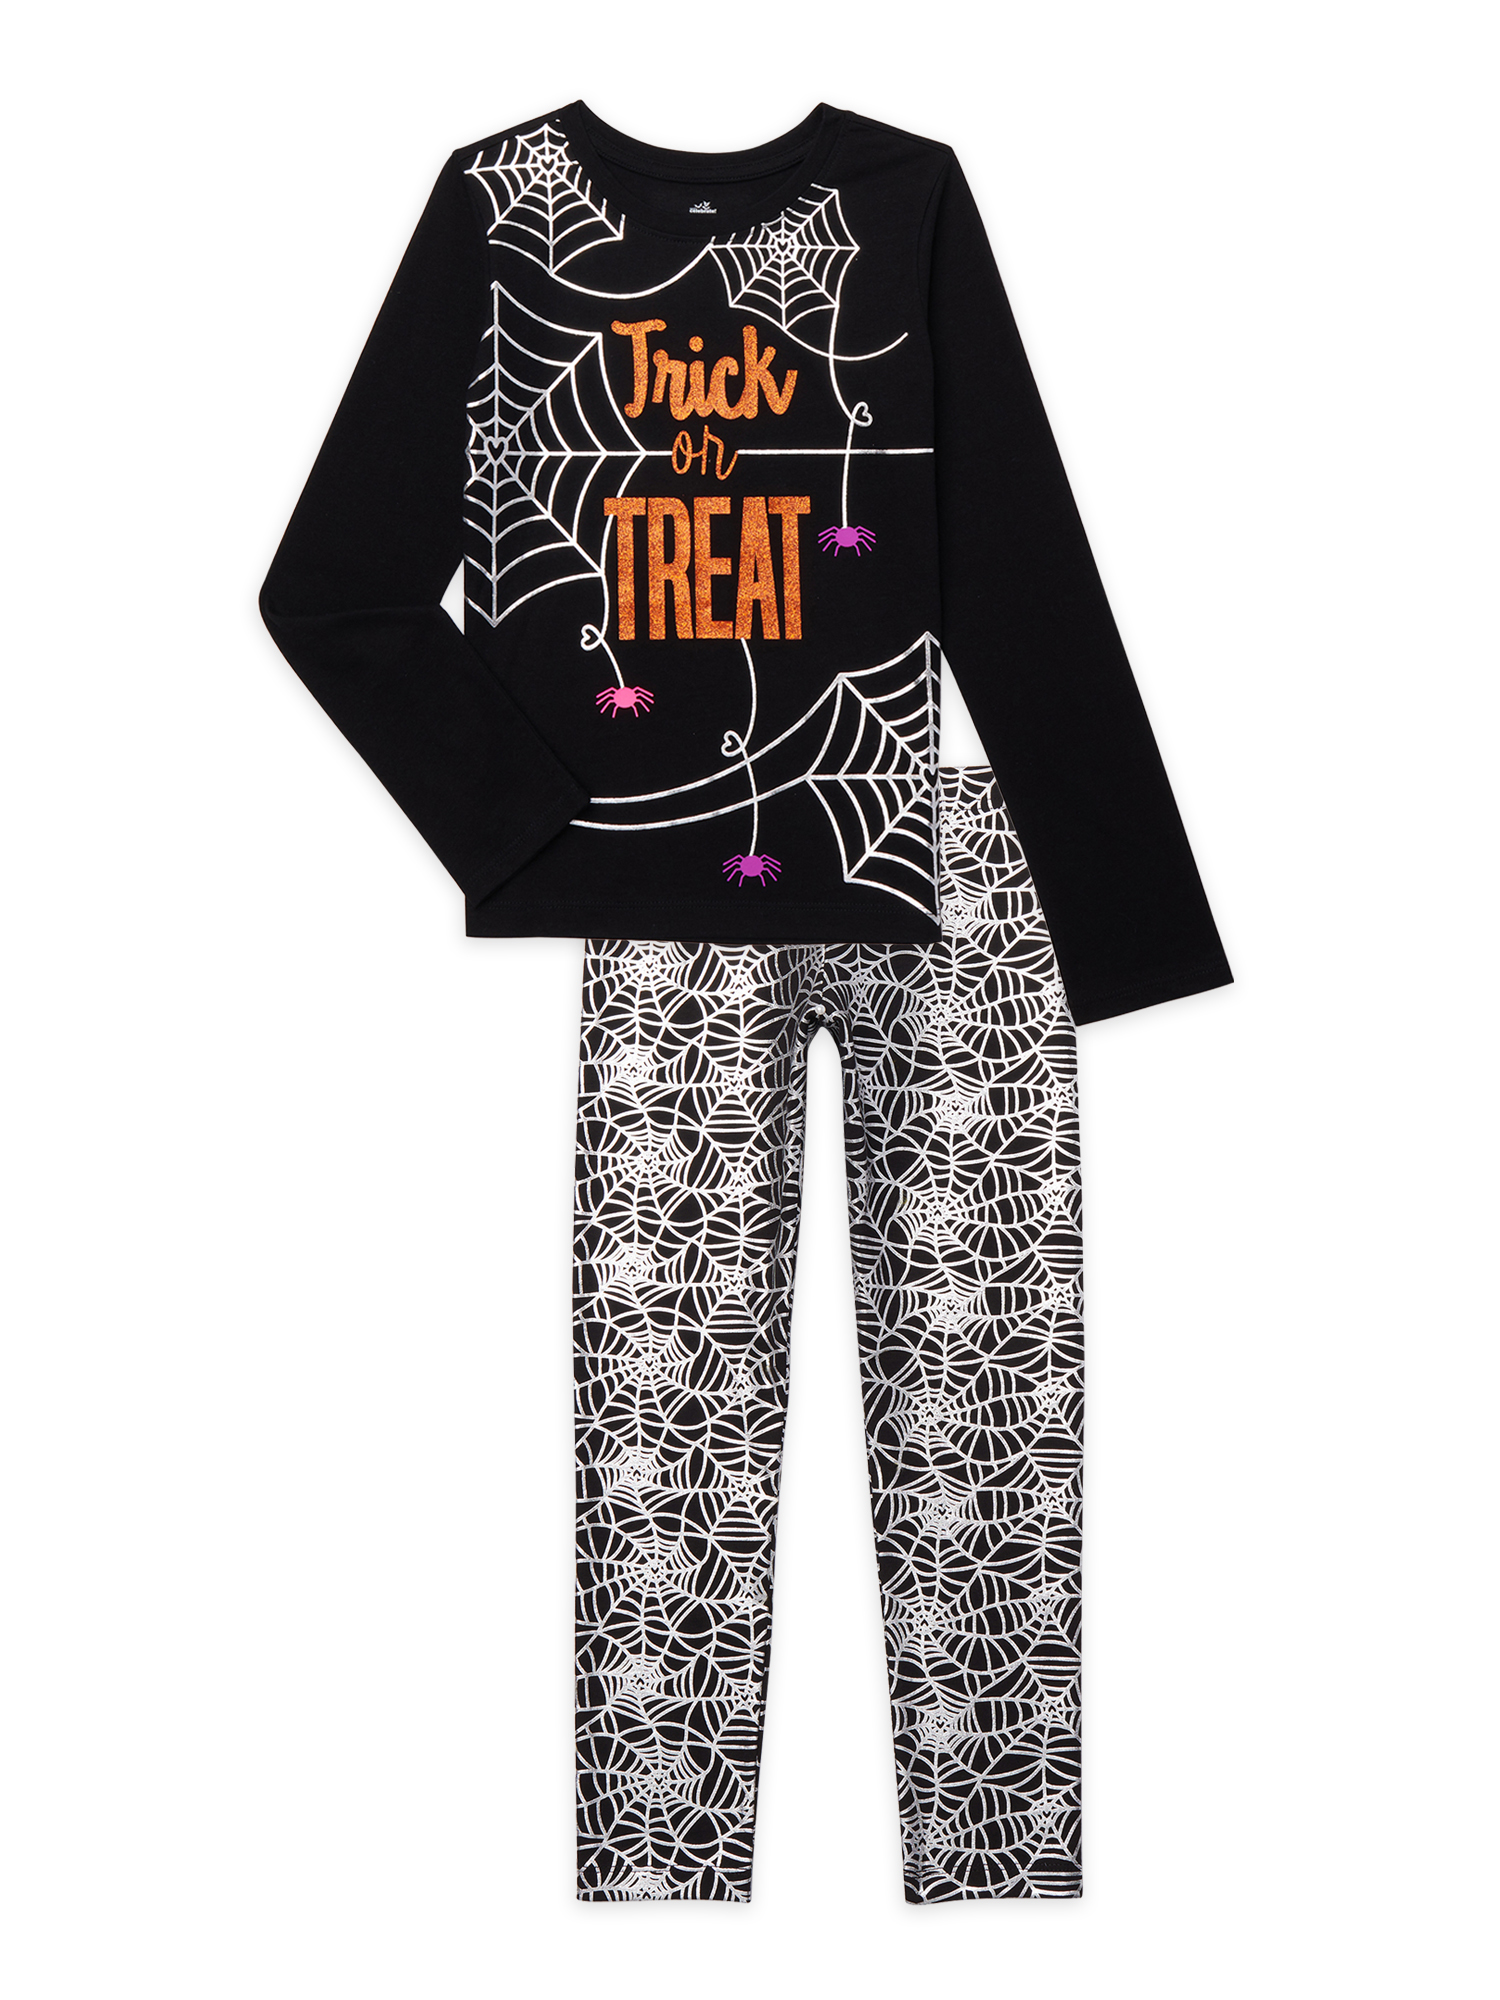 Halloween Girls Graphic Top and Leggings Outfit Set, 2-Piece, Sizes 4-18 - image 1 of 4